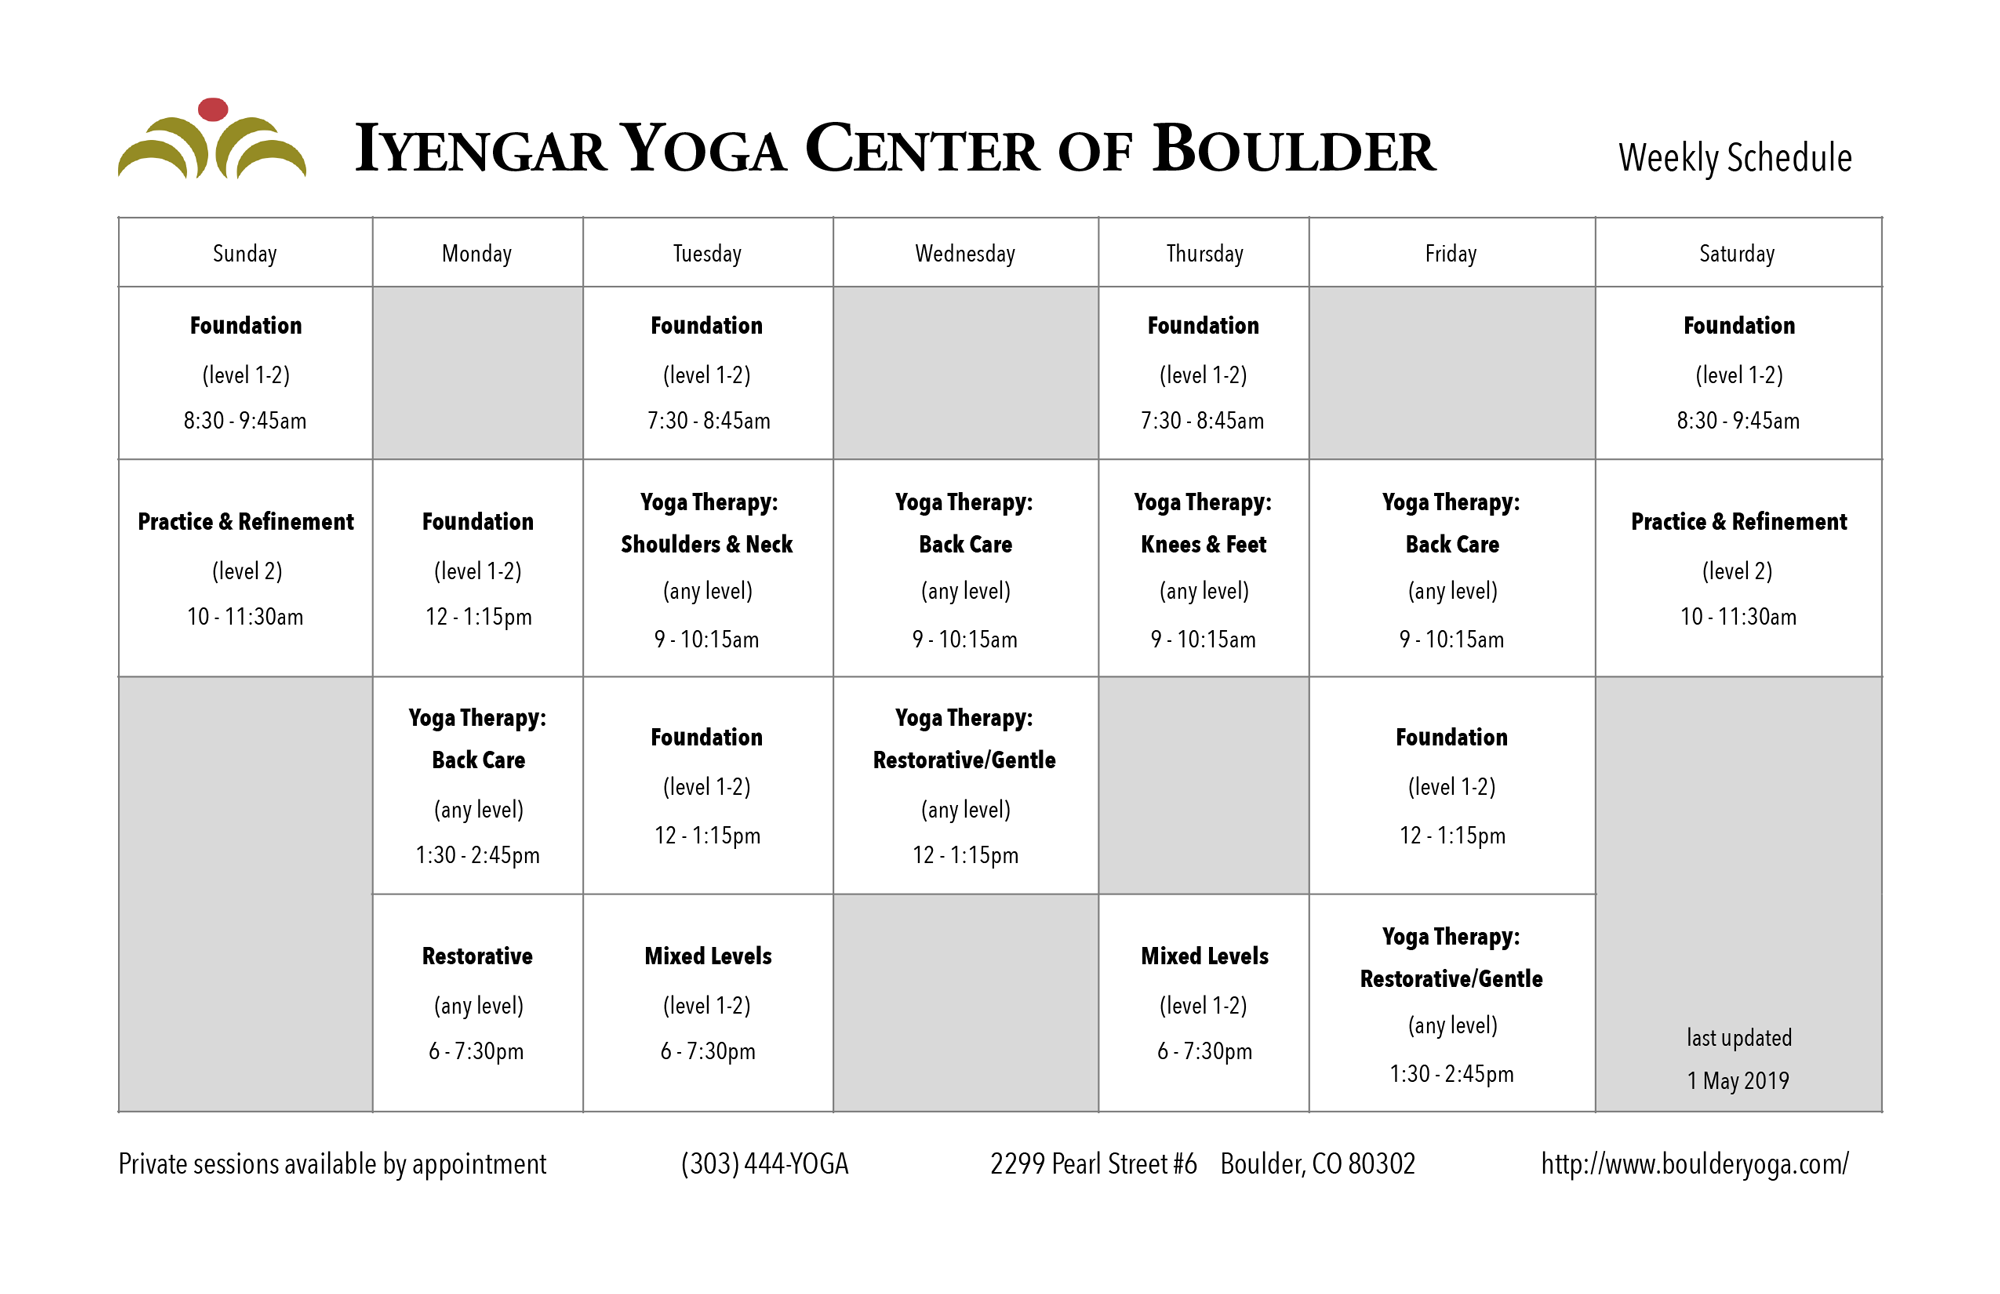 https://www.boulderyoga.com/wp/wp-content/uploads/2017/08/IYCB_schedule.png